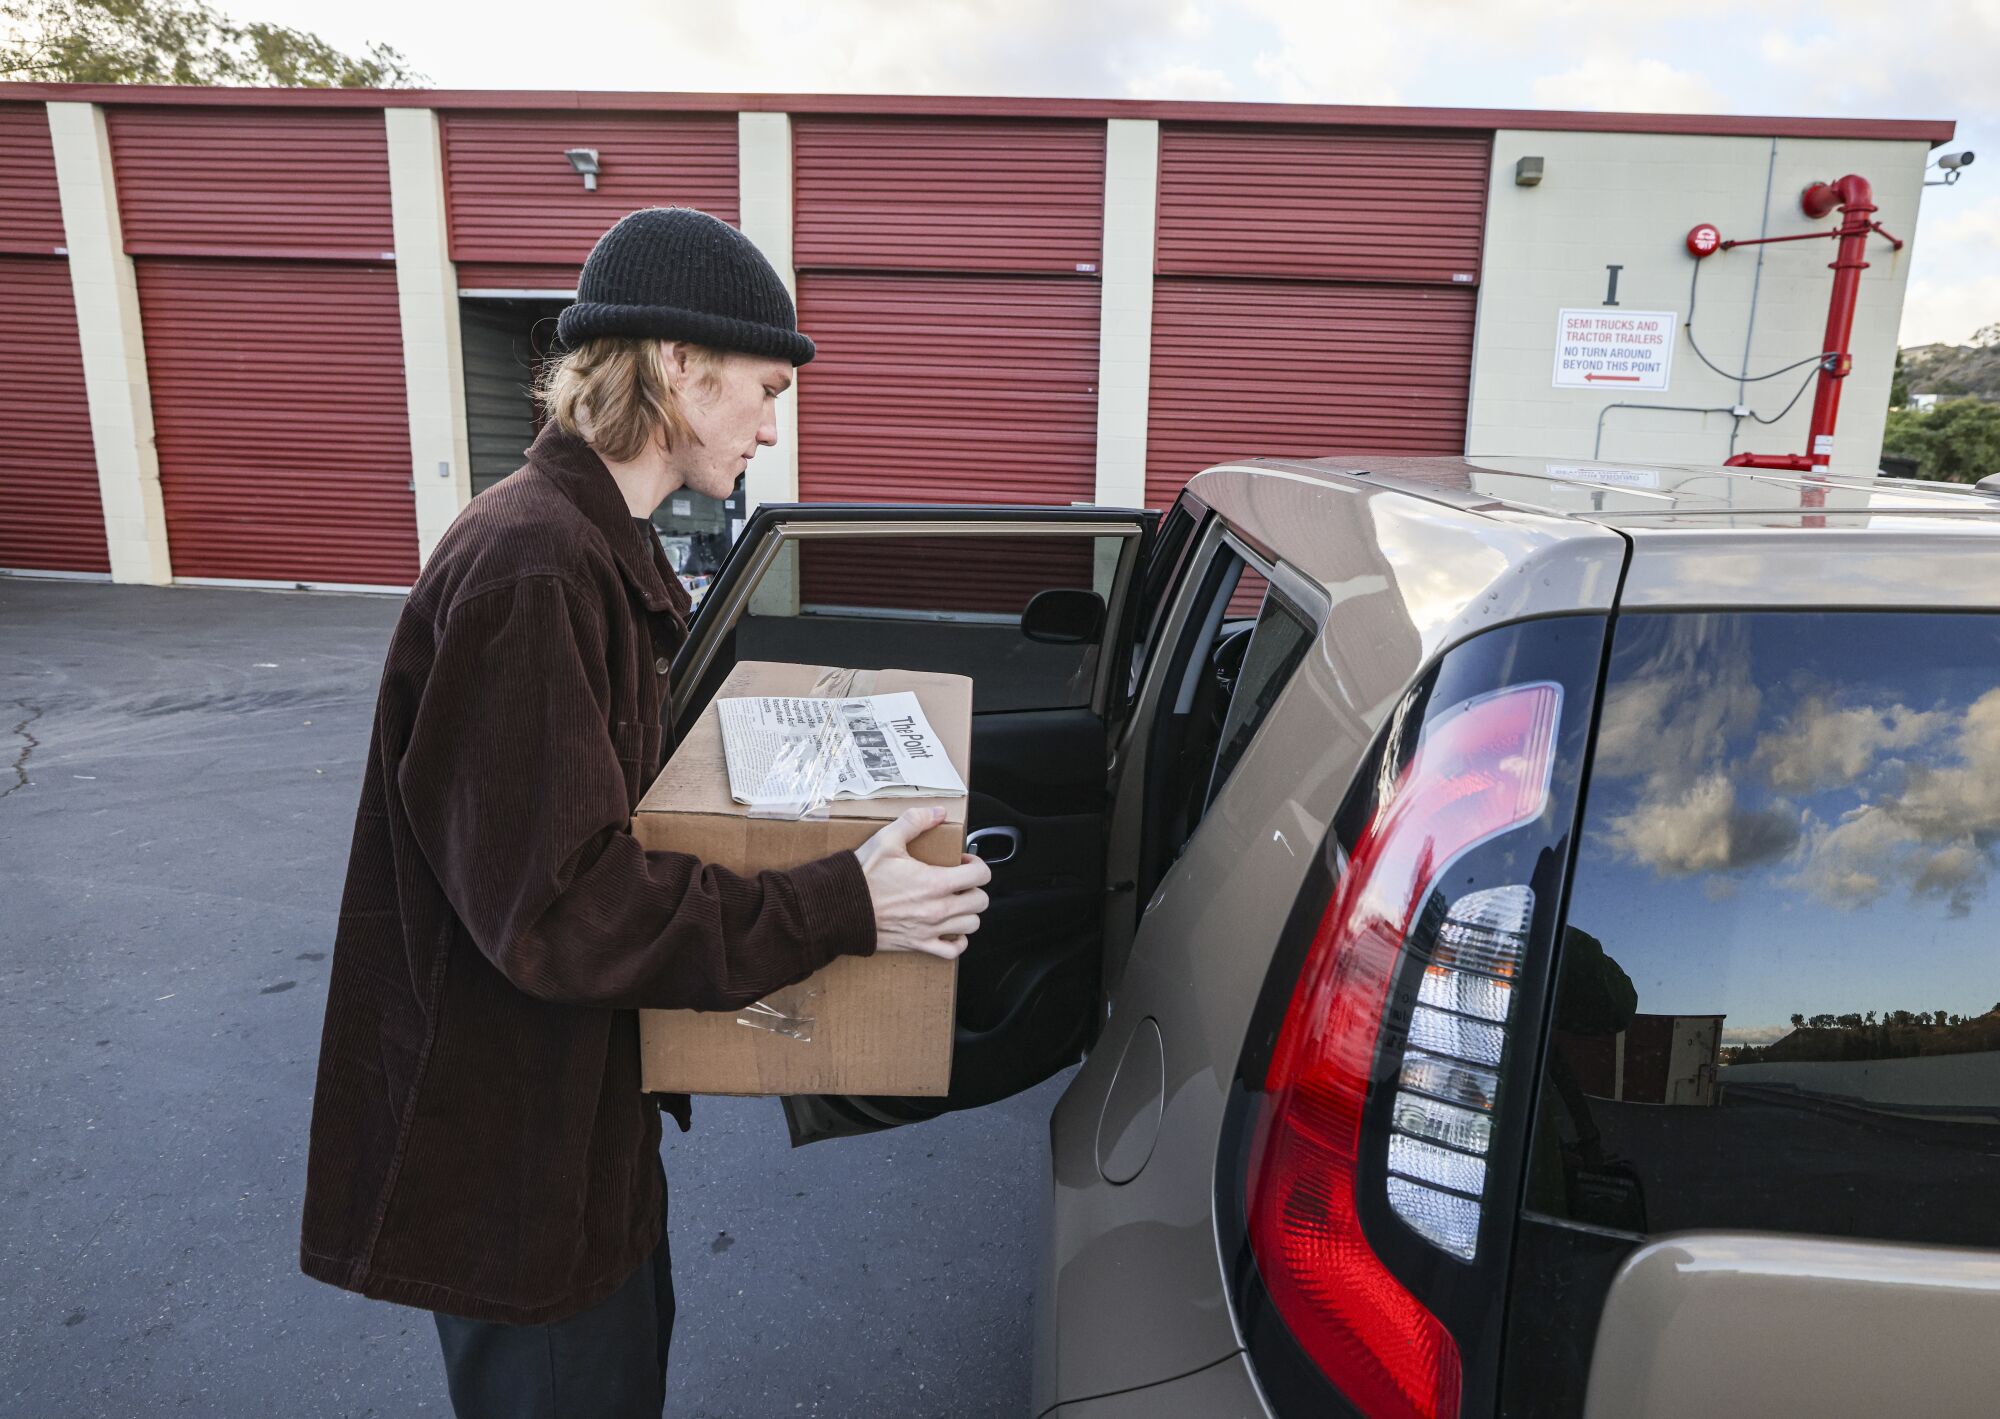 Zach Dinsmore, staff writer at The Point weekly, picks up a box of his school paper at Price Self Storage.